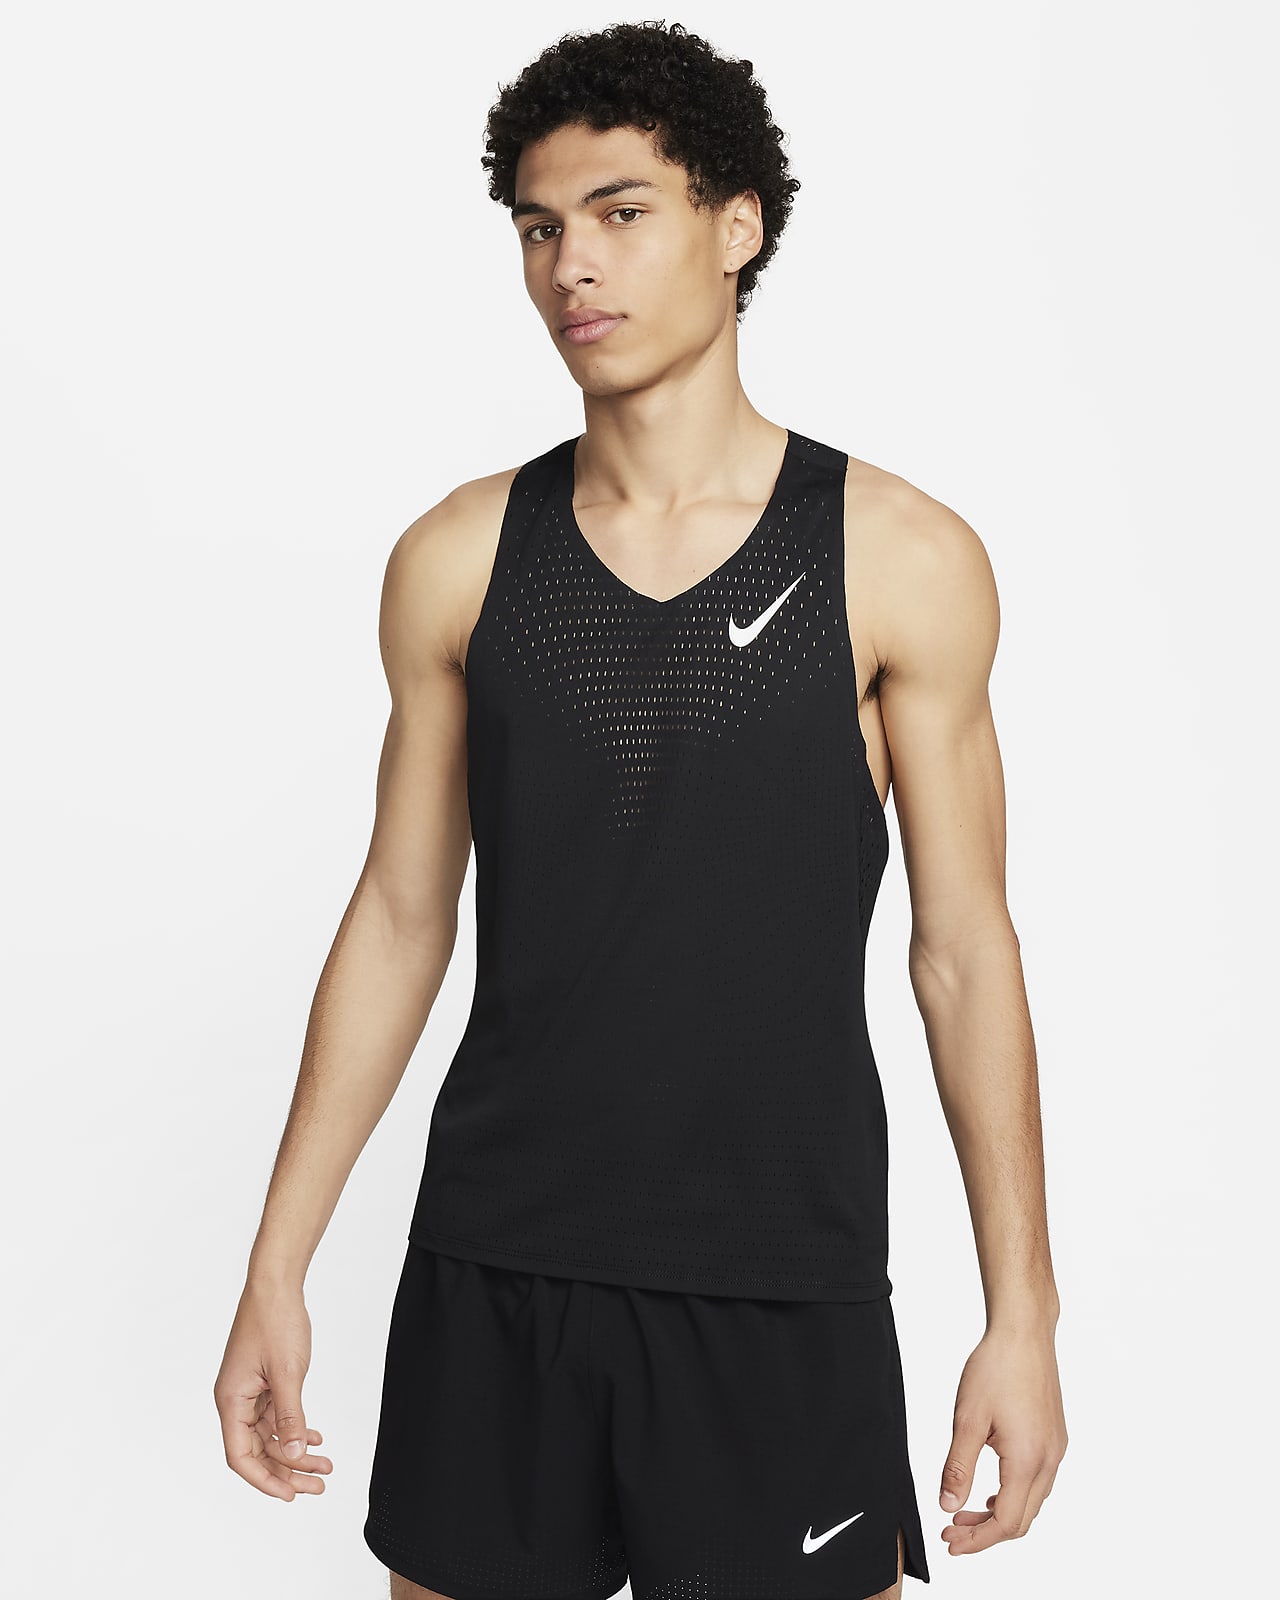 Nike Aeroswift Tank Top review — Moving More Miles